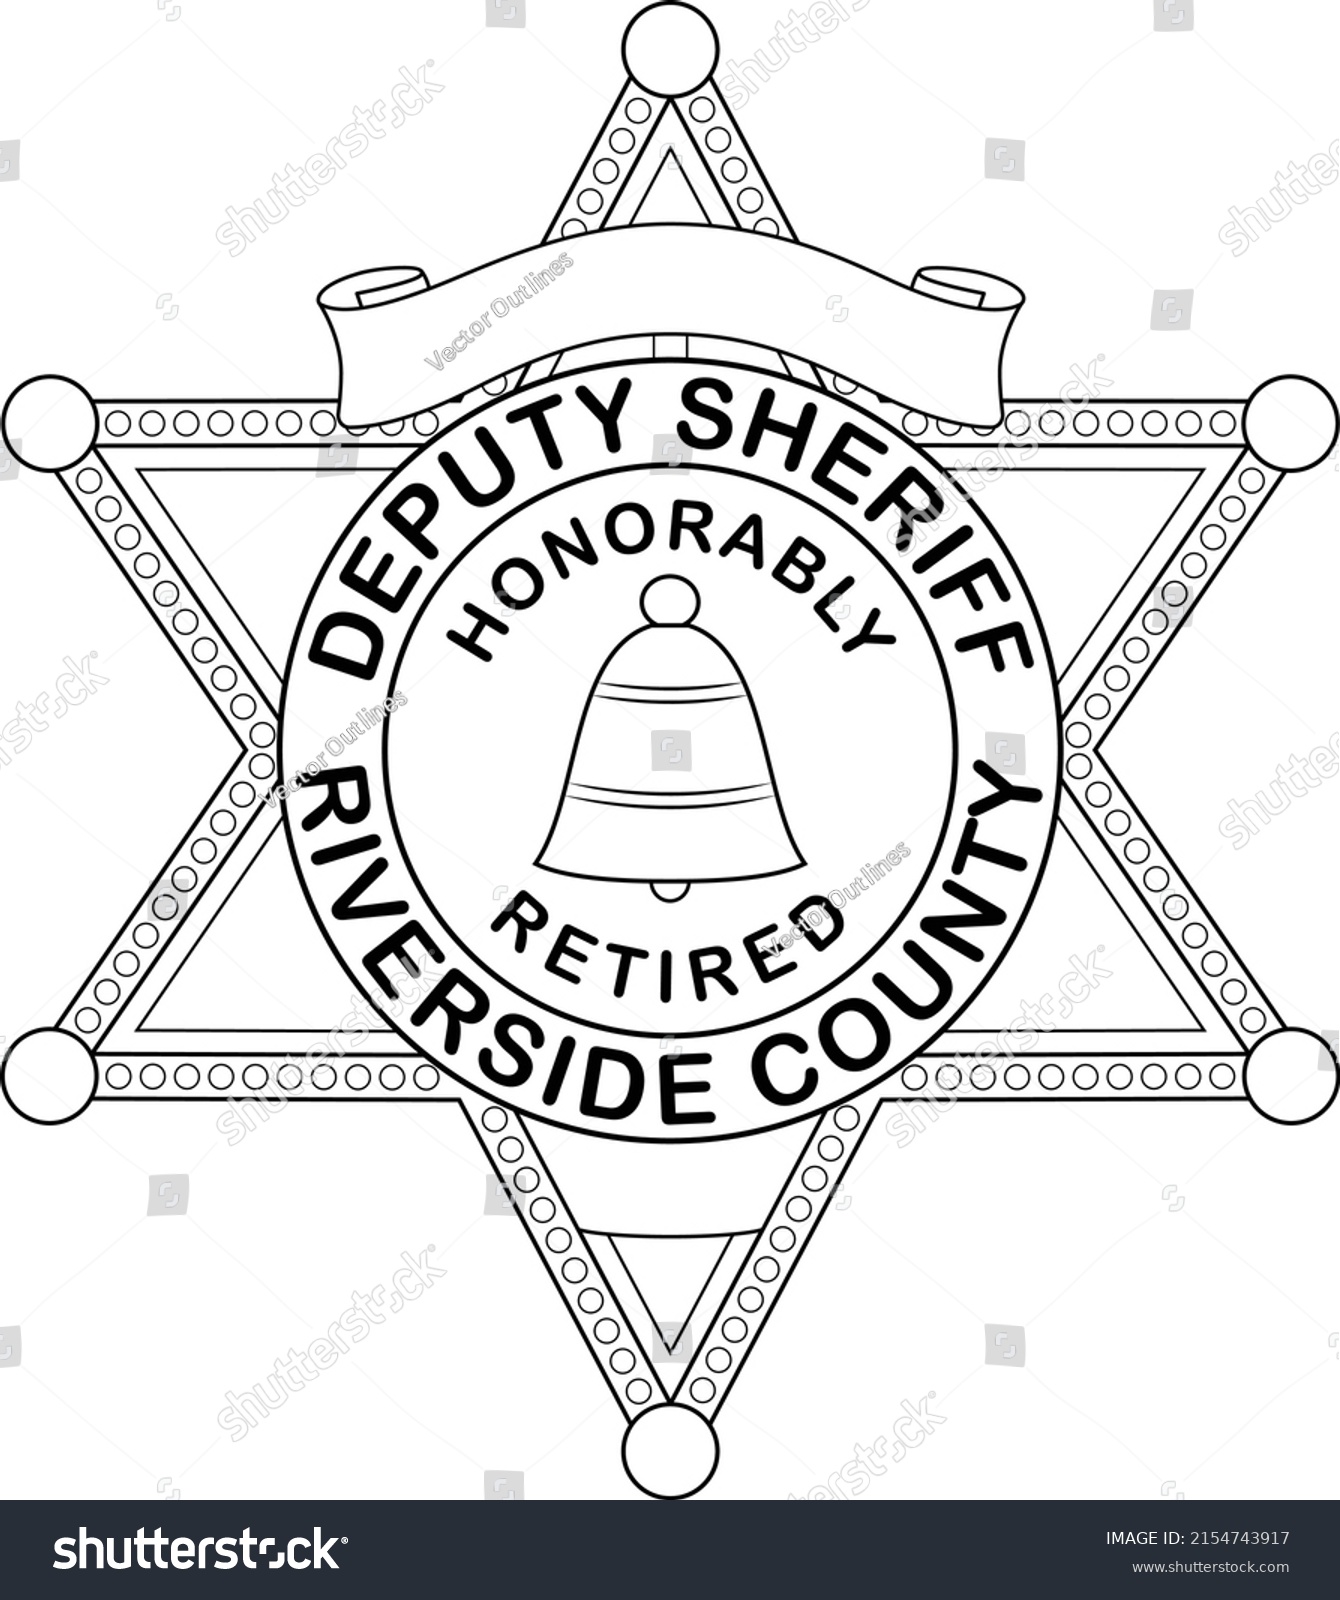 SVG of Retired Chief Deputy Sheriff Badge without the badge number for adding custom number Eps vector file Riverside County California svg